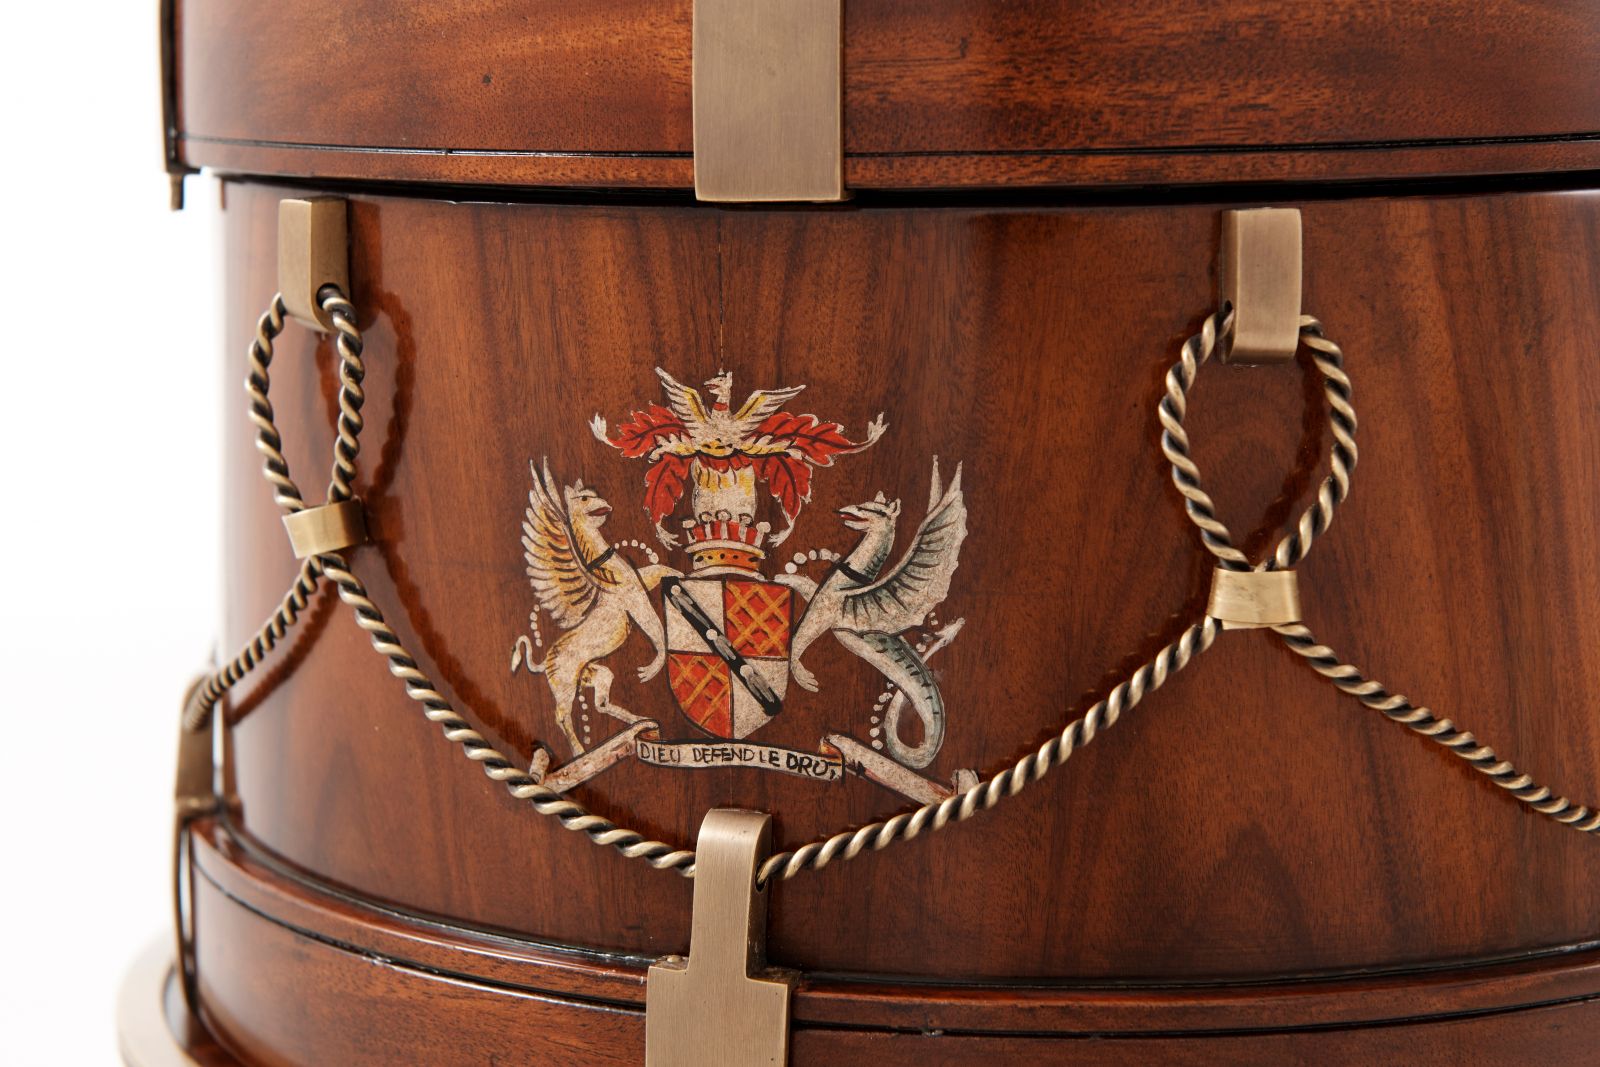 A Mahogany and Brass Drum Shaped Box - Brights of Nettlebed